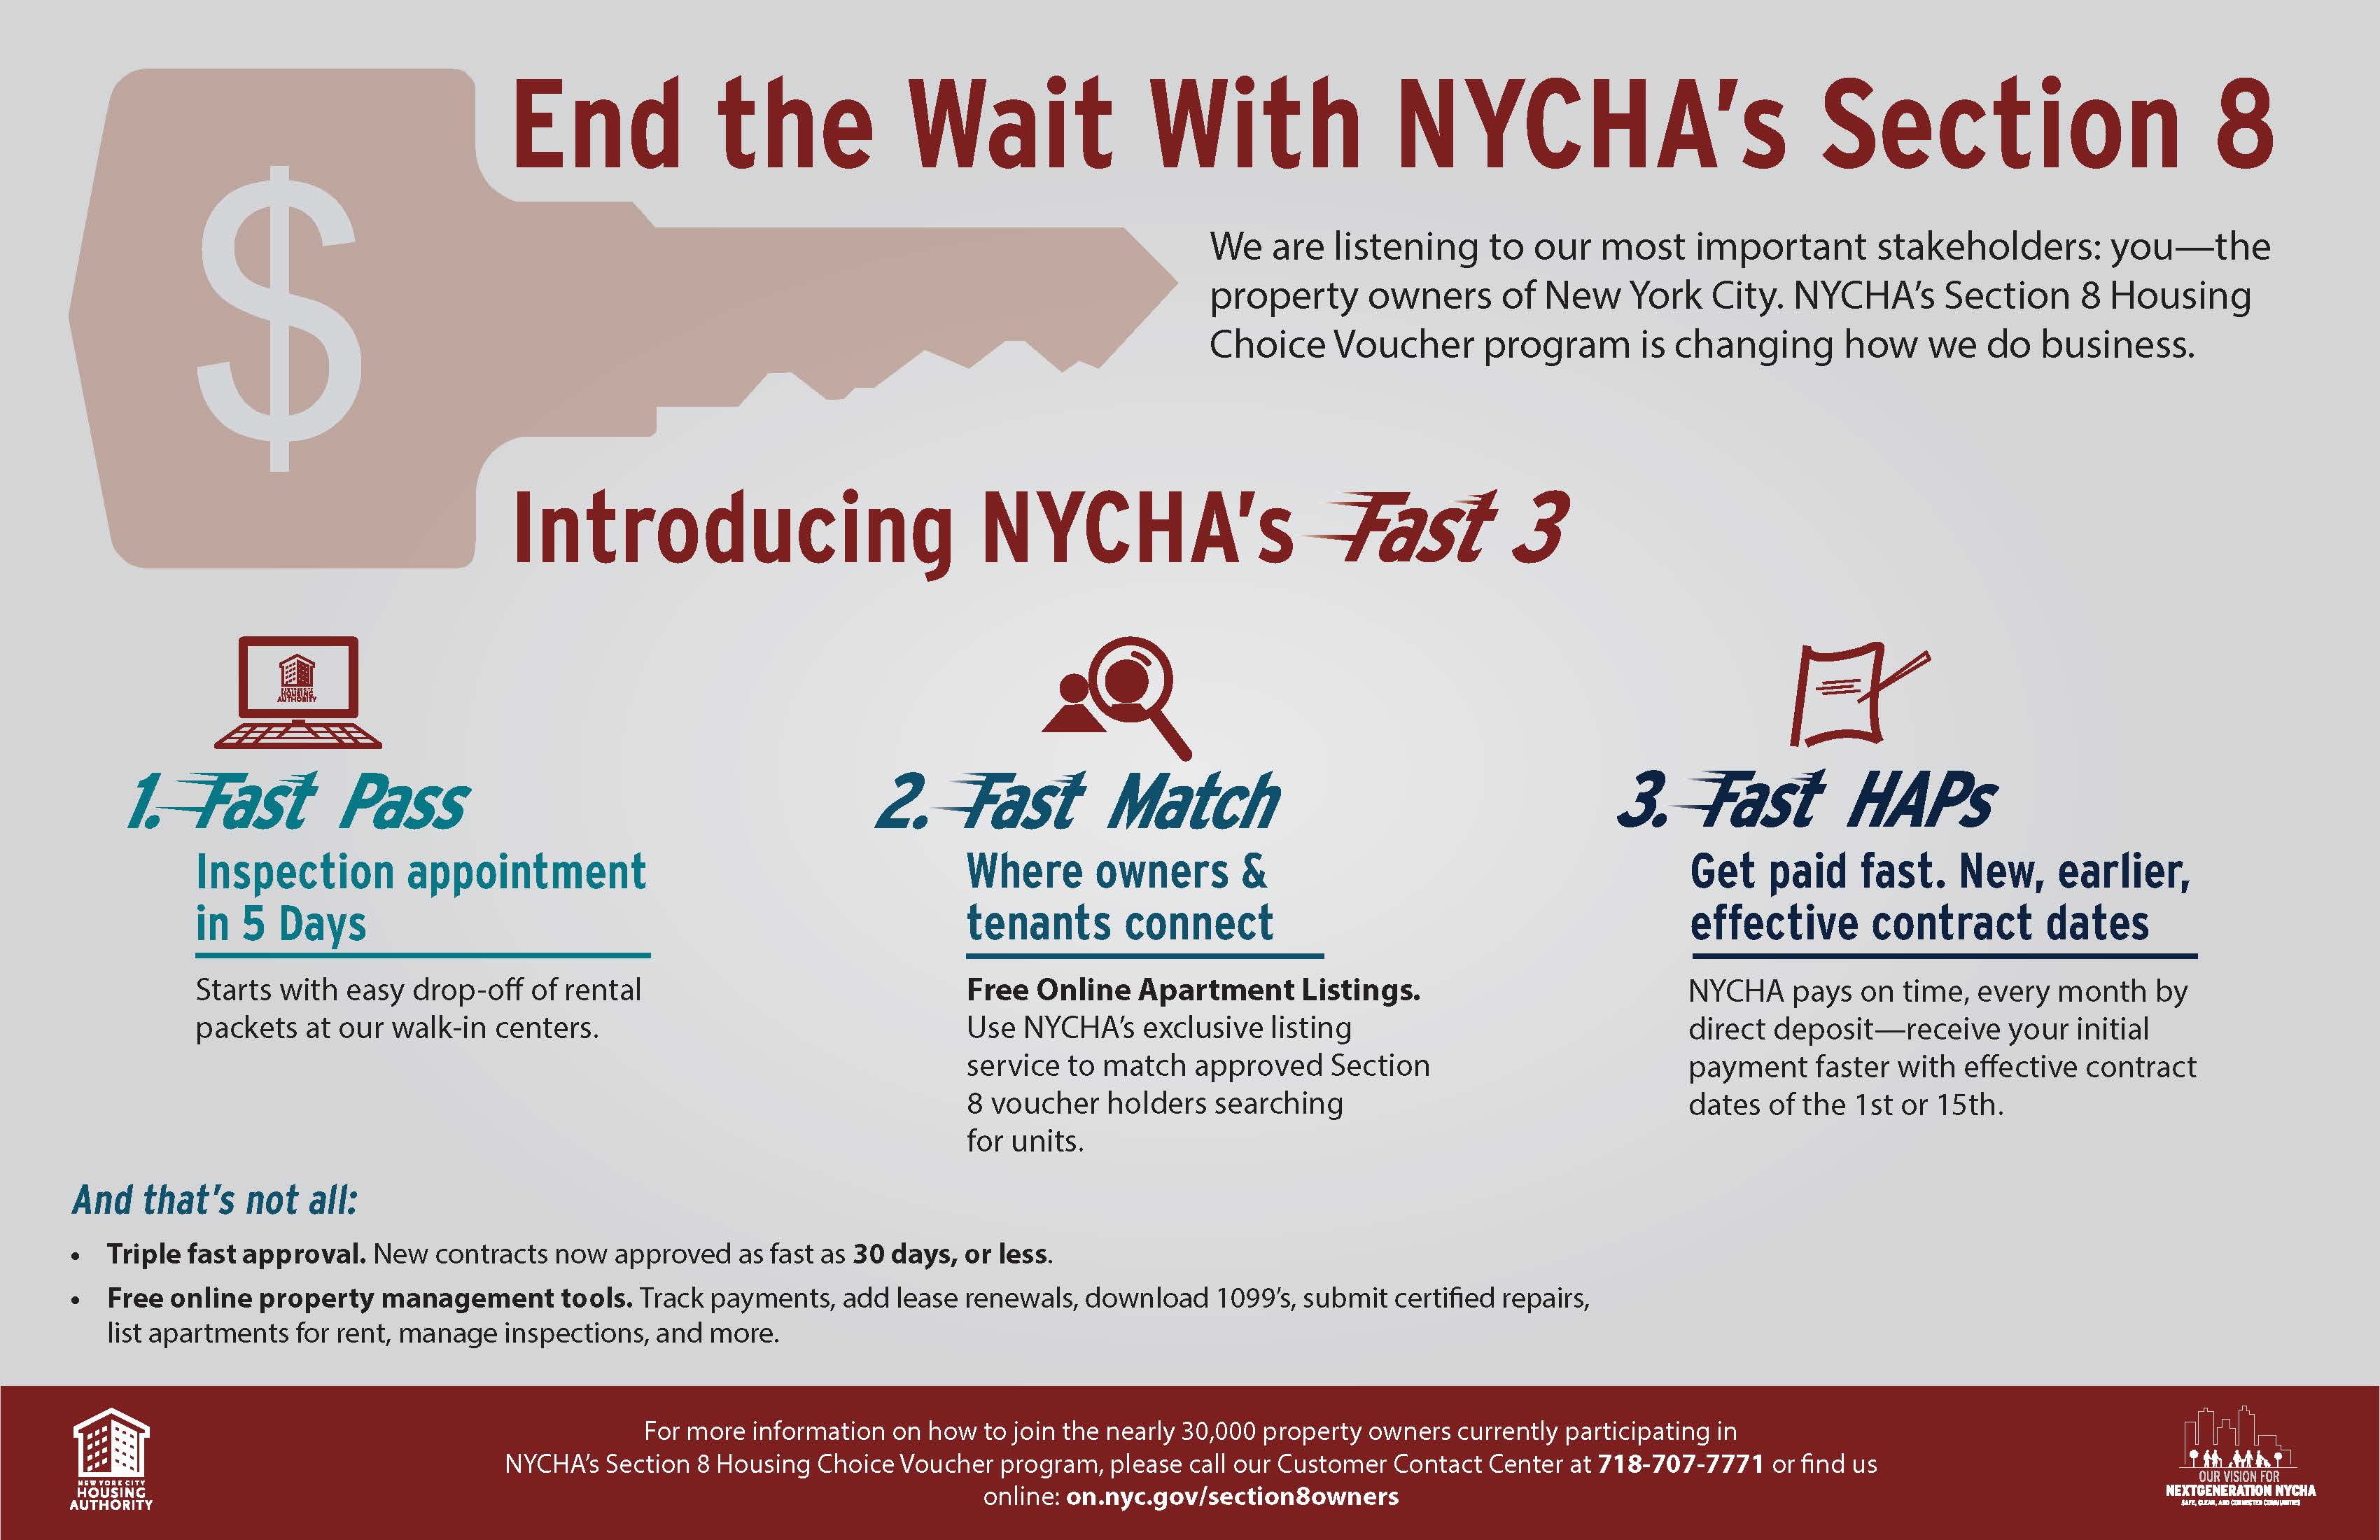 NYCHA Revamps Section 8 Voucher Process for Property Owners NYHC